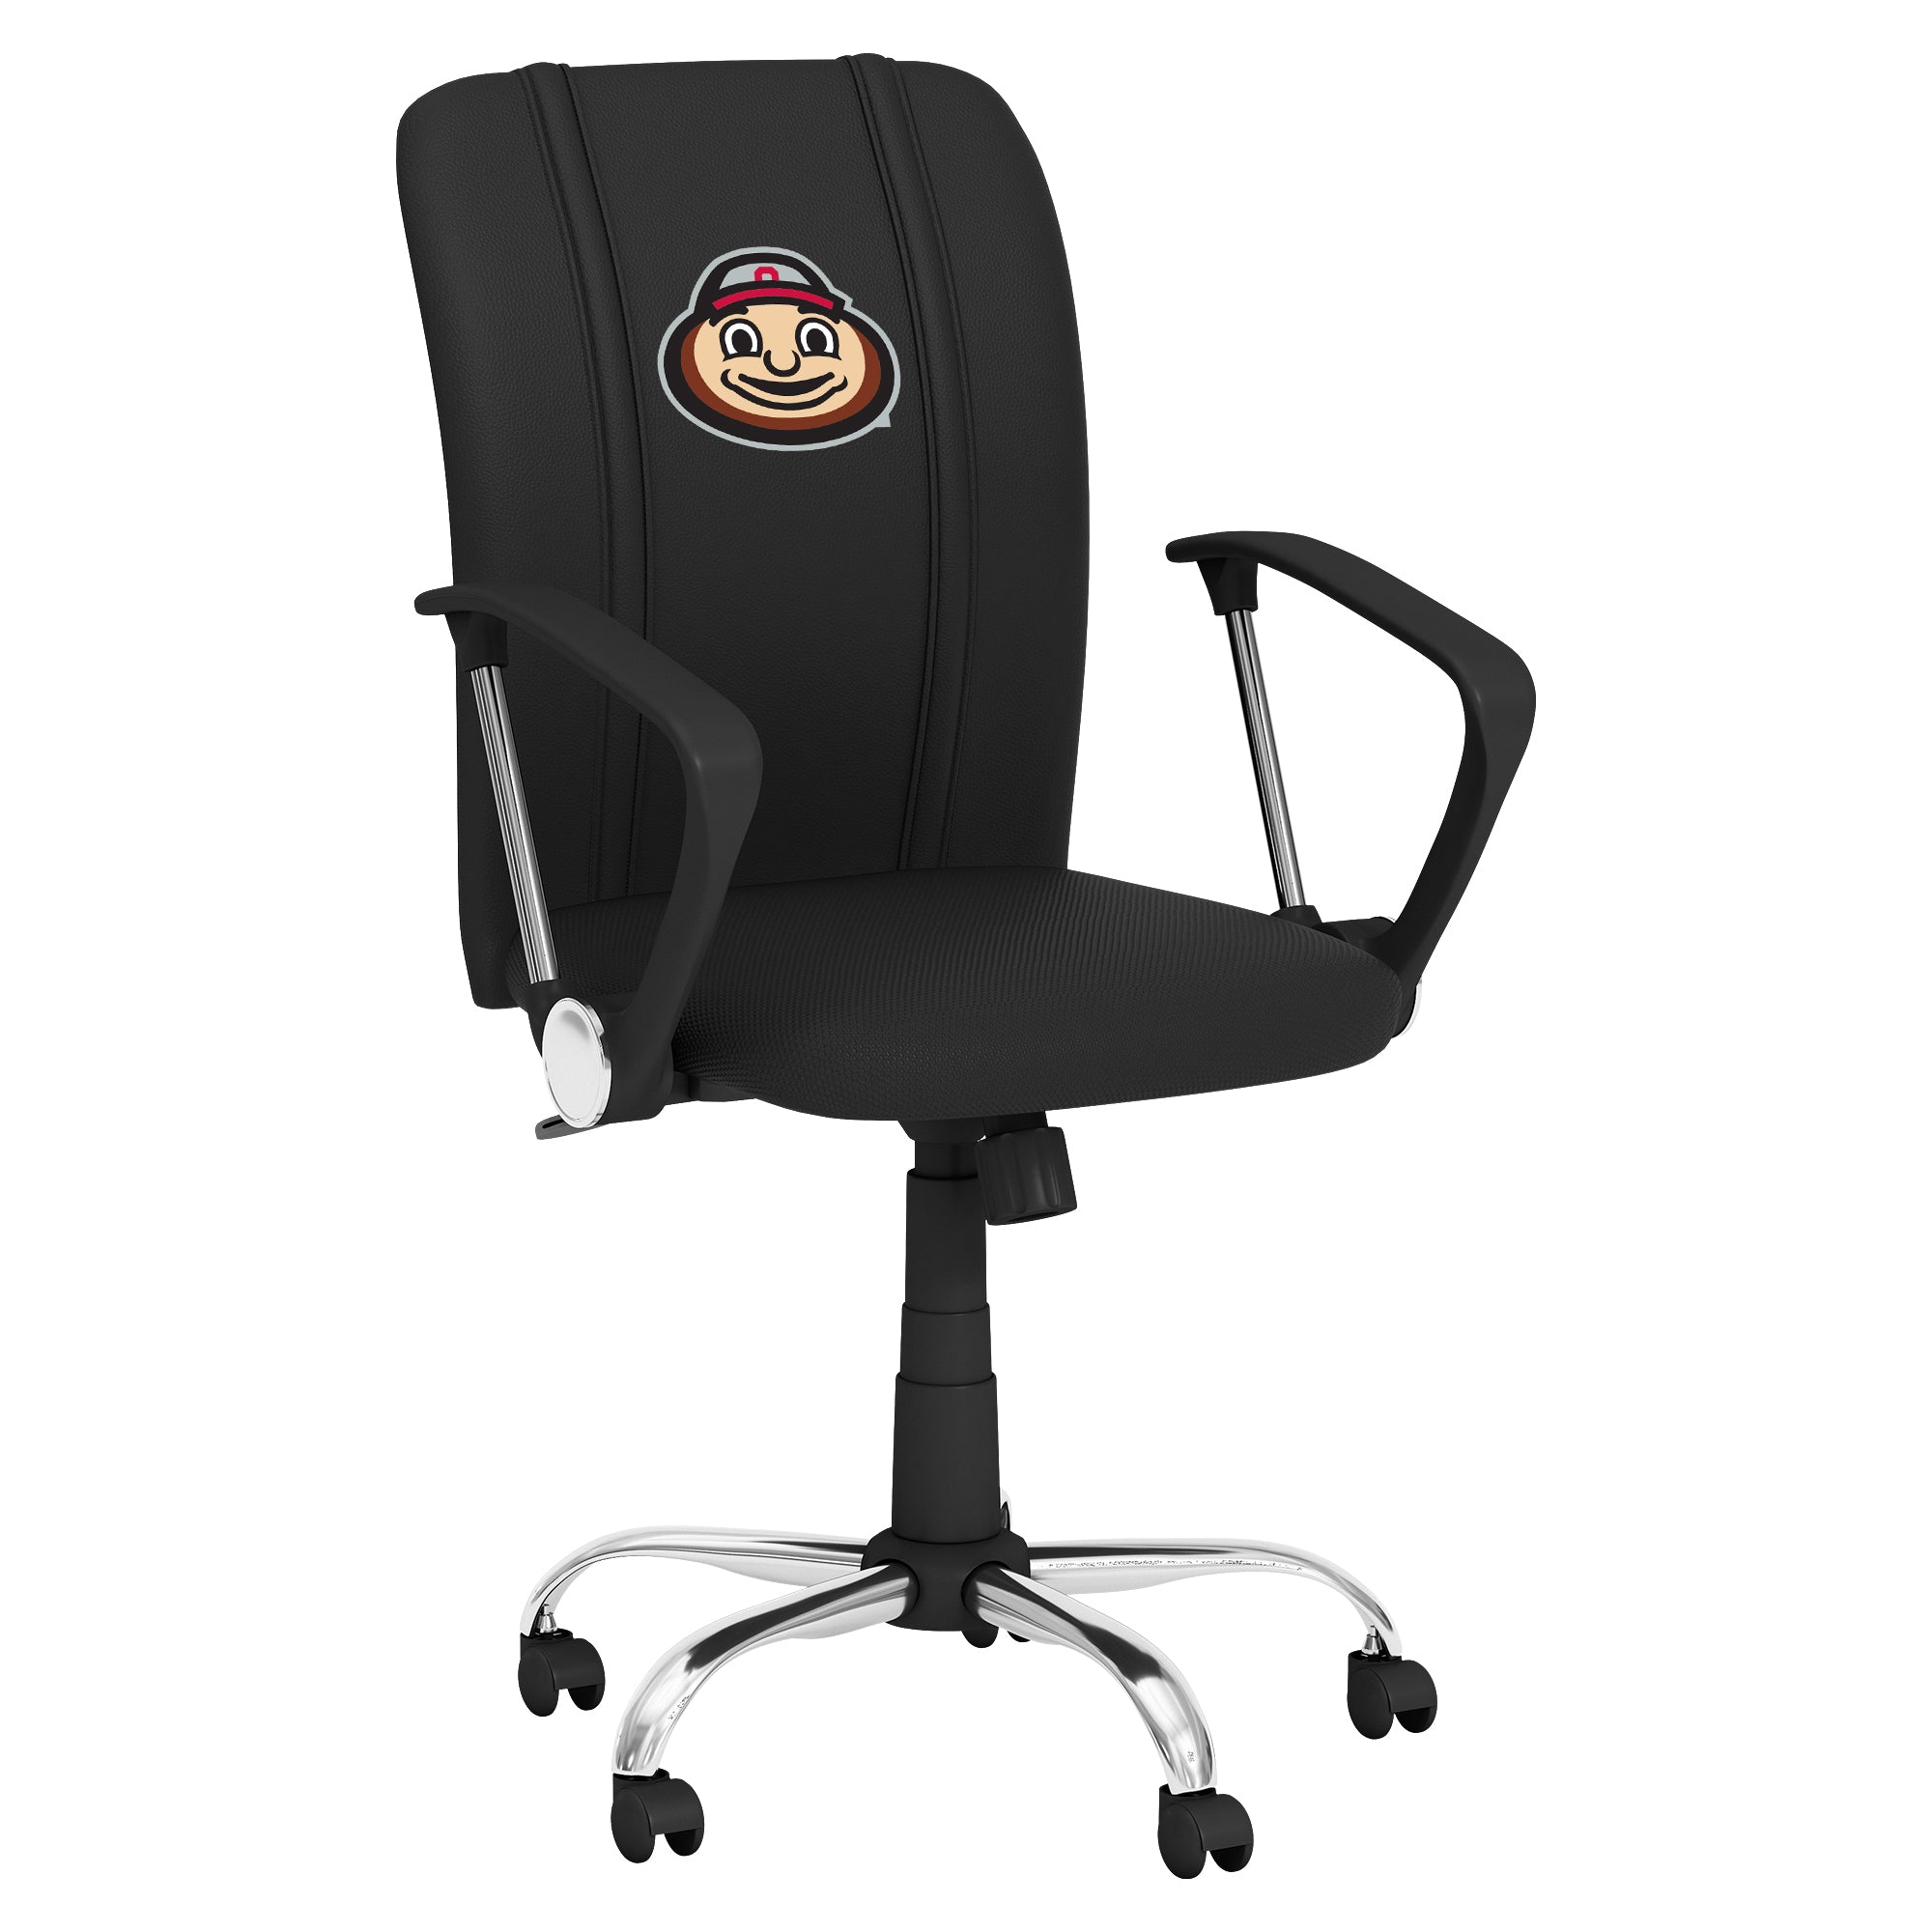 Ohio State Curve Task Chair with Ohio State Buckeyes Brutus Head Logo